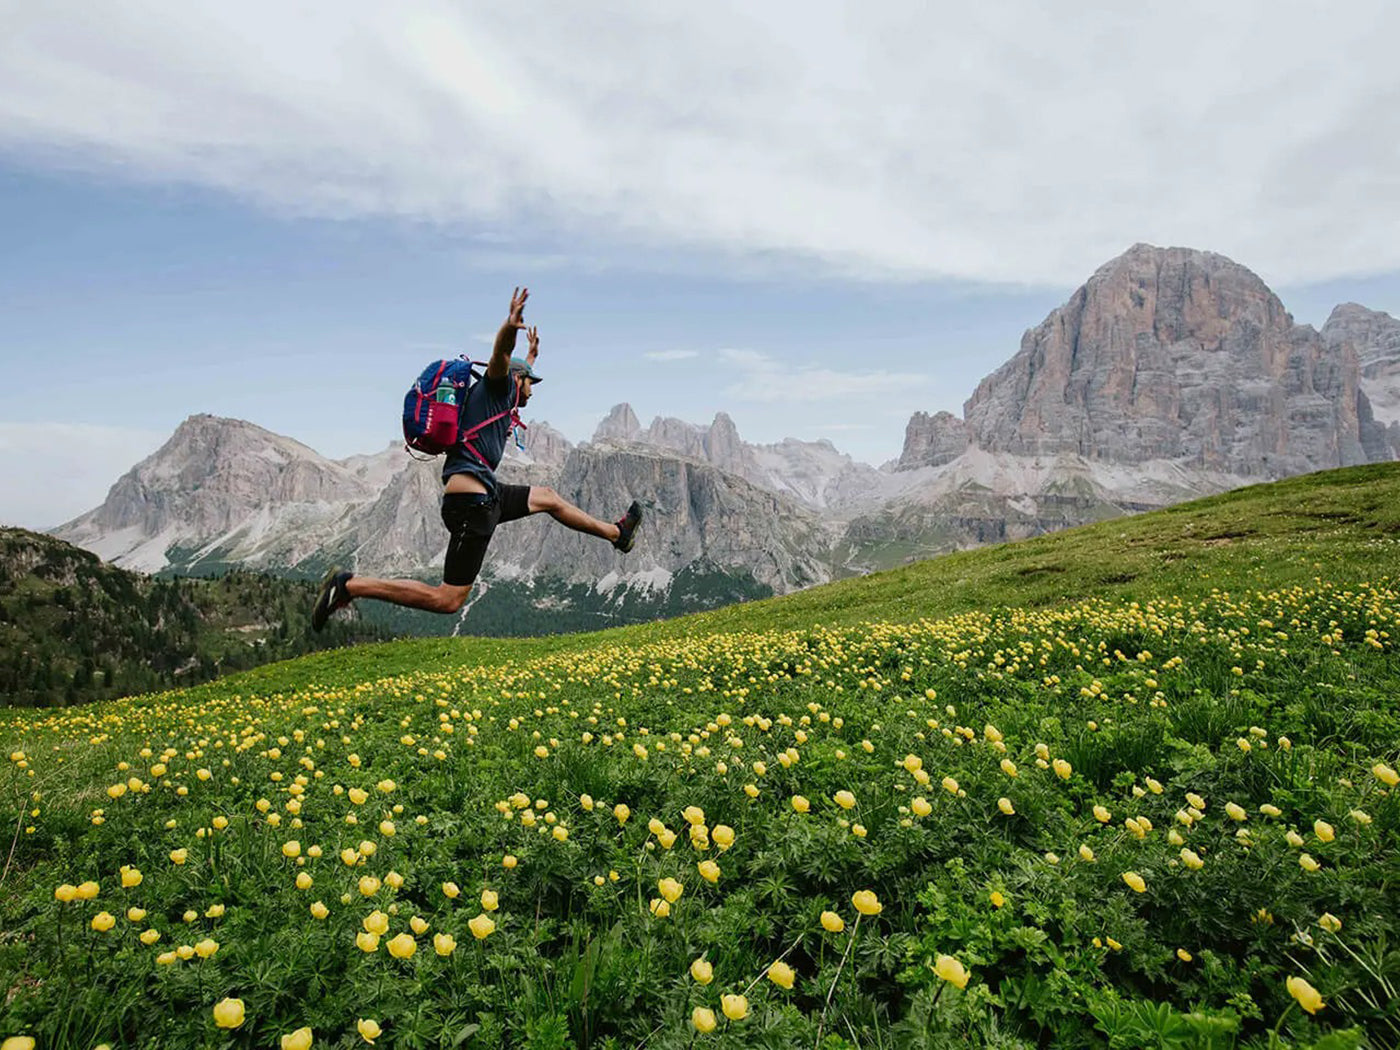 man jumping with his arms up in a field of dandelions